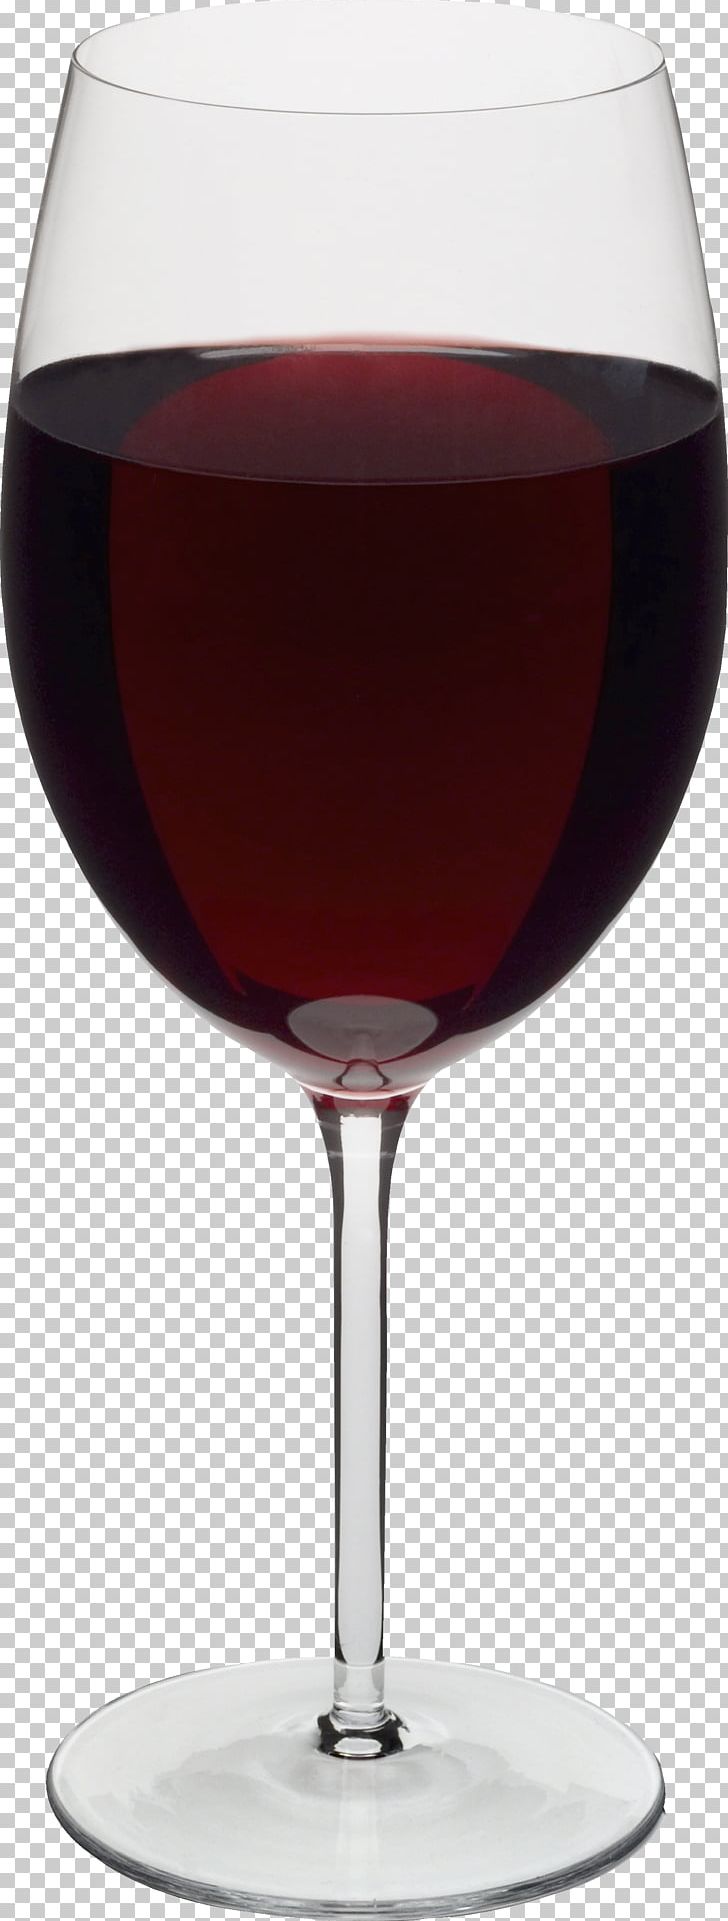 Wine Glass Red Wine Champagne Glass Cup PNG, Clipart, Champagne Glass, Champagne Stemware, Cocktail, Cup, Drink Free PNG Download